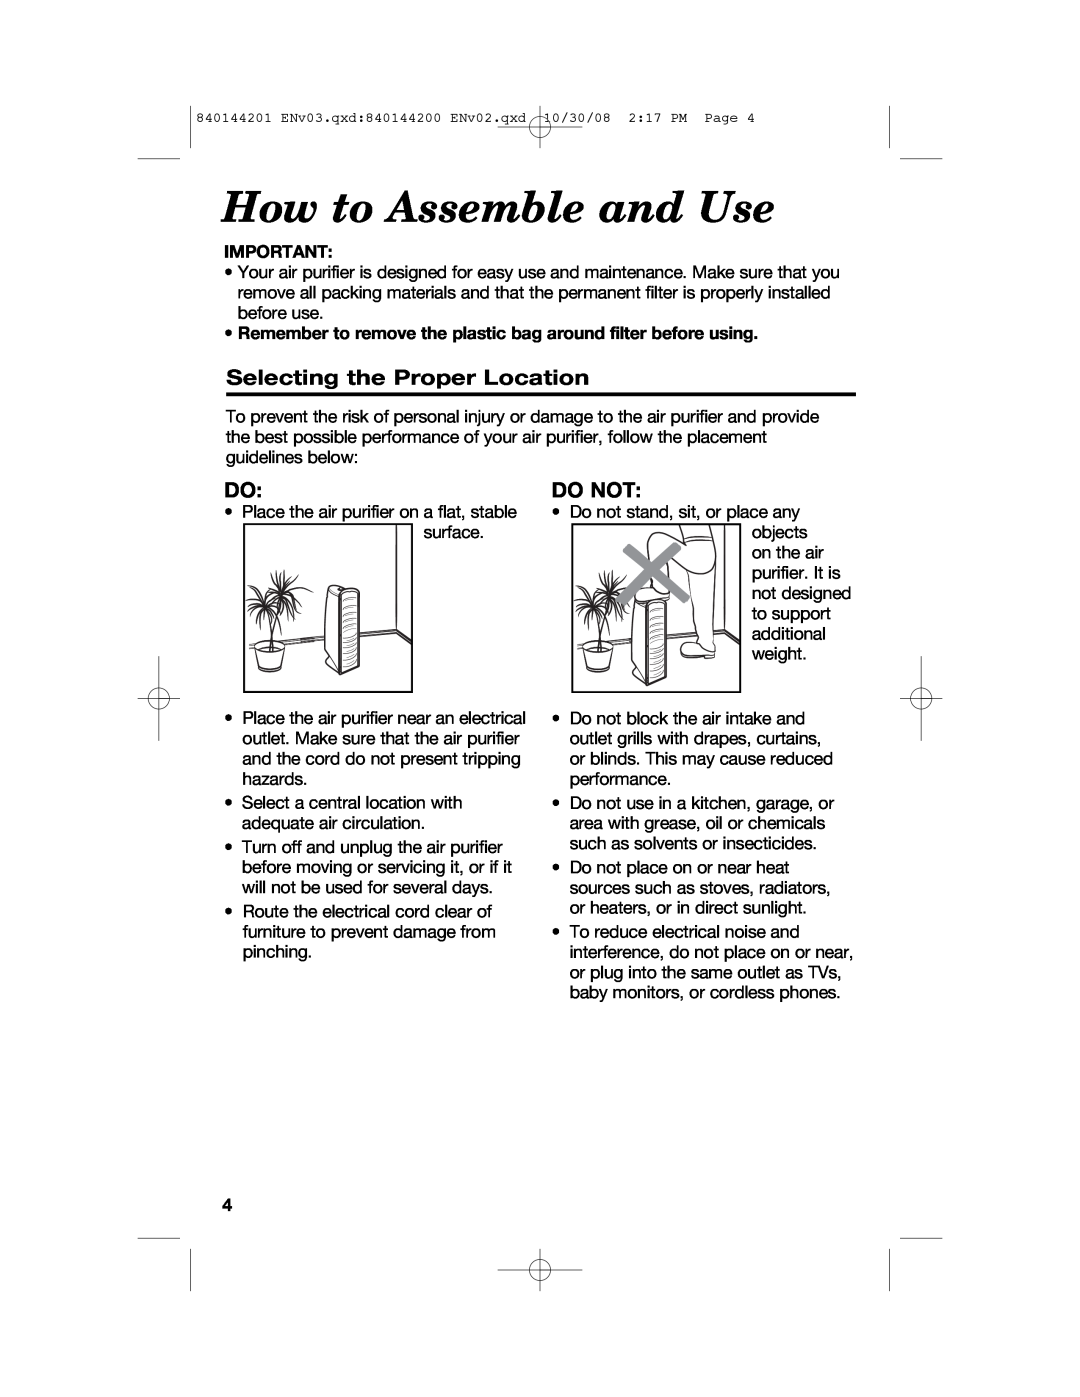 Hamilton Beach 840144201, 04992F manual How to Assemble and Use, Selecting the Proper Location, Do Not 